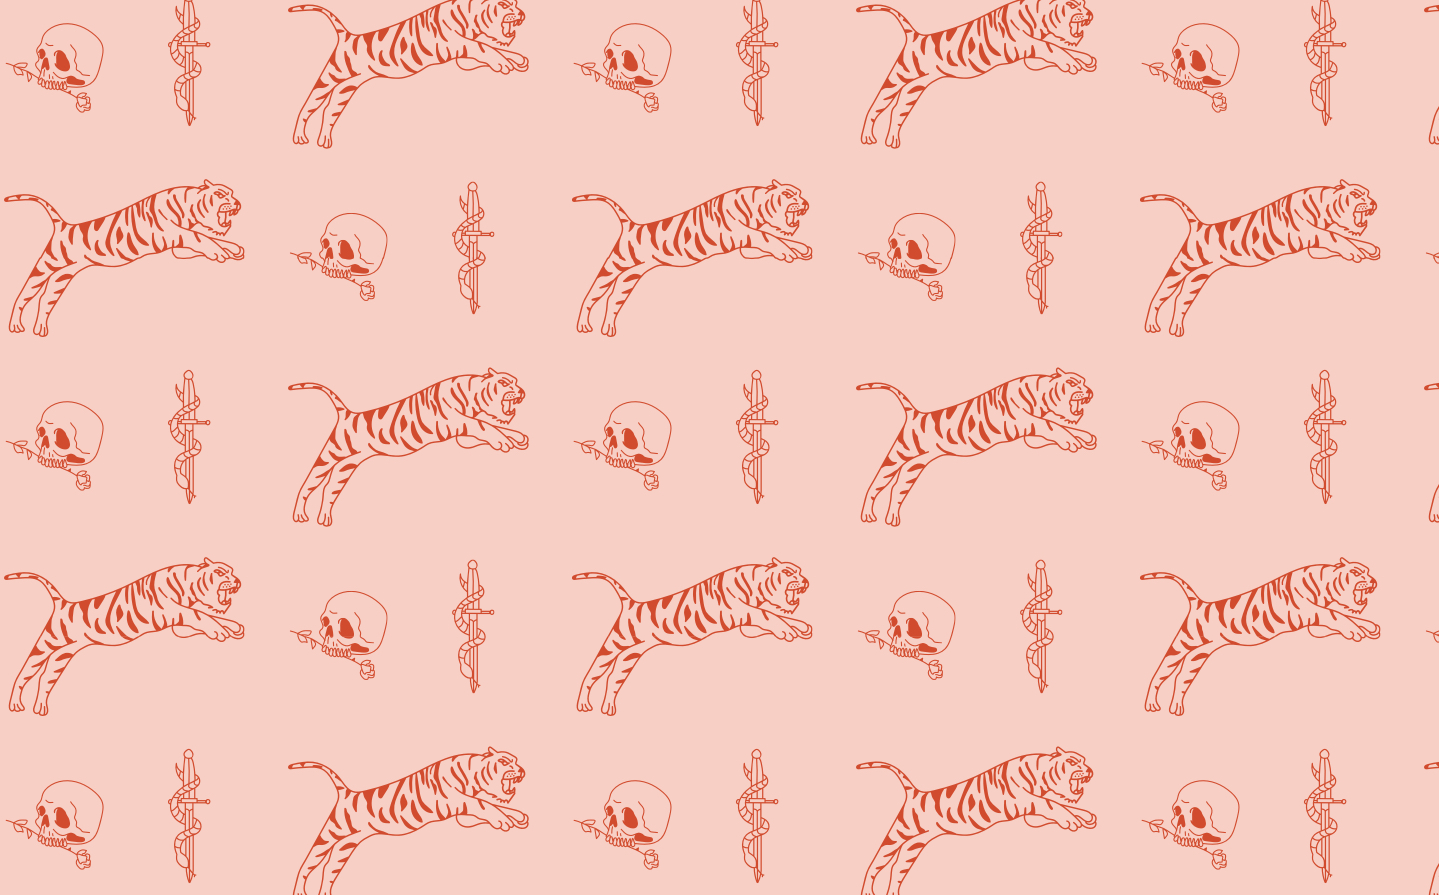 cats-catering-pattern-design